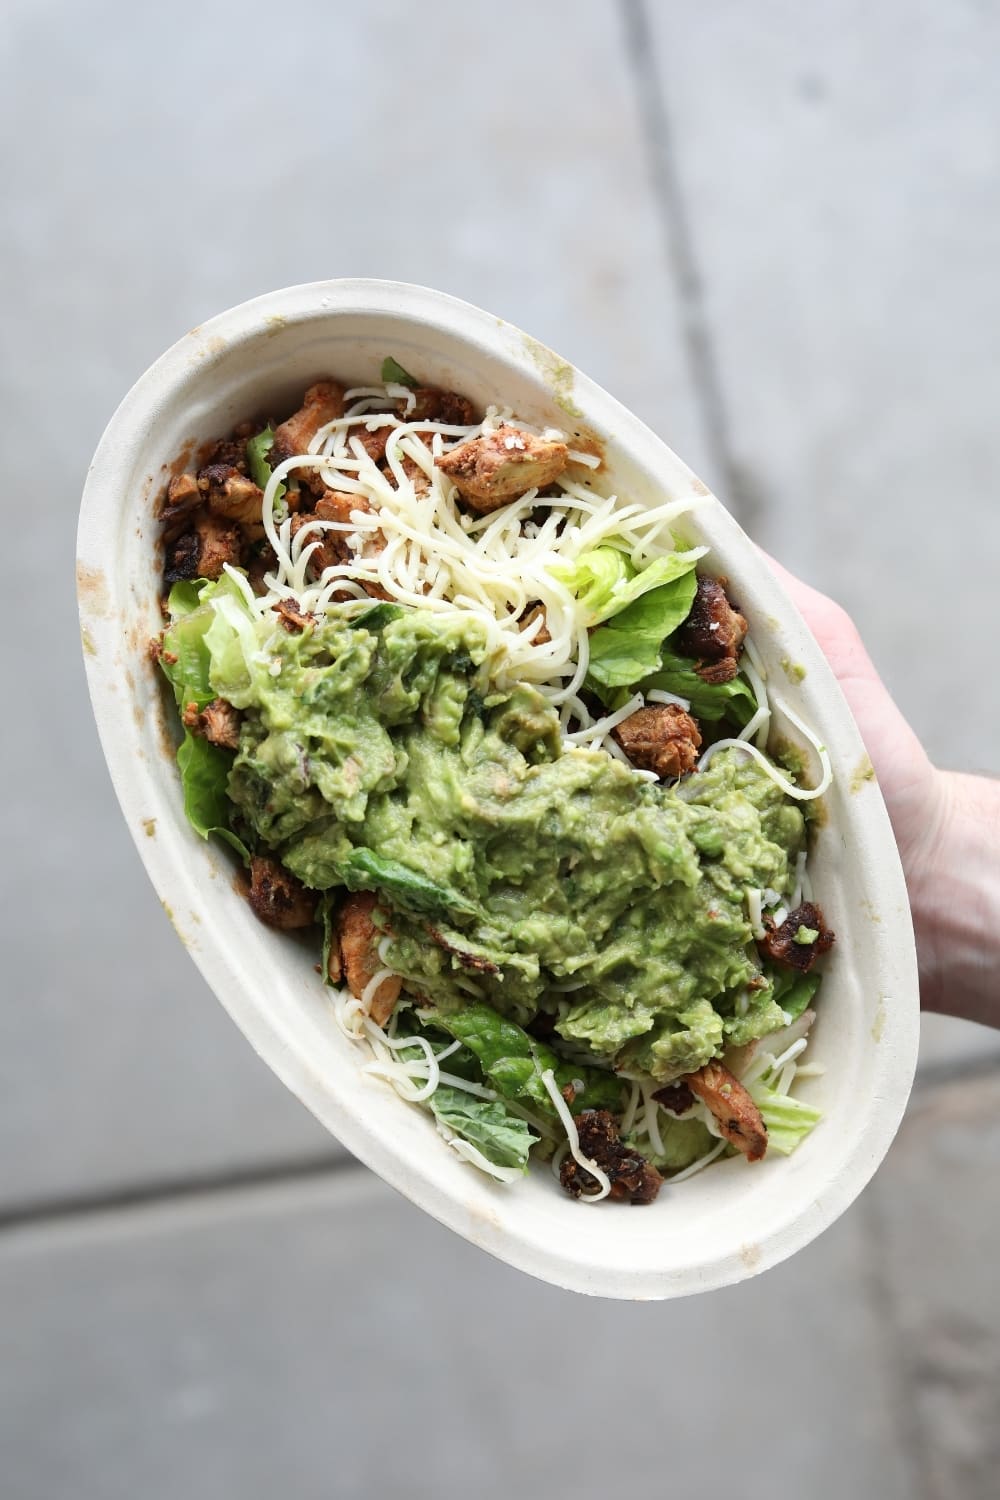 A hand holding a keto chipotle bowl with chicken, shredded cheese, lettuce, and guacamole.